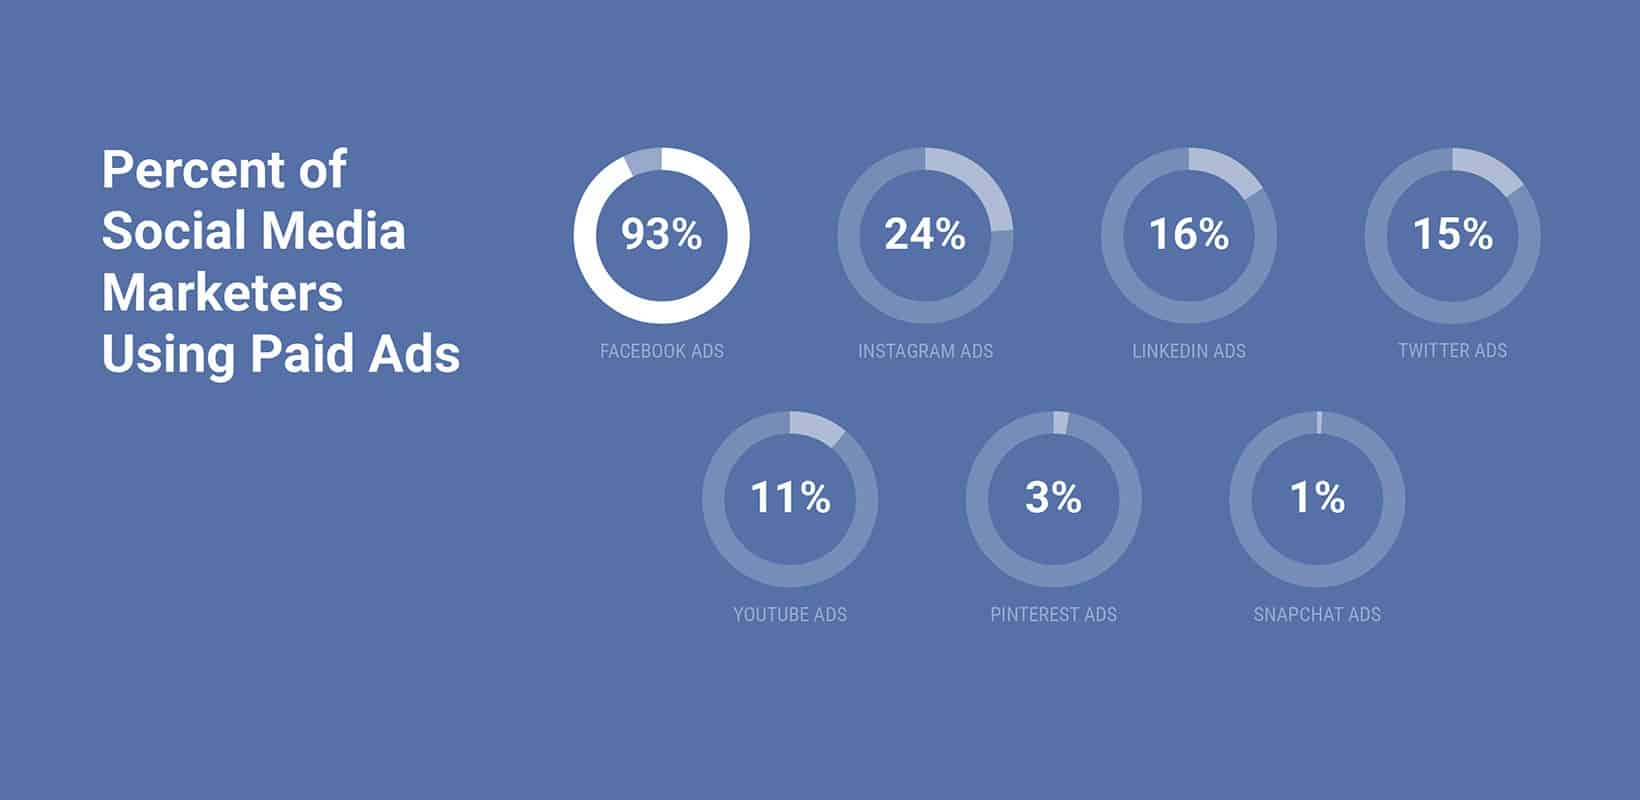 Percent of social media marketers using paid ads